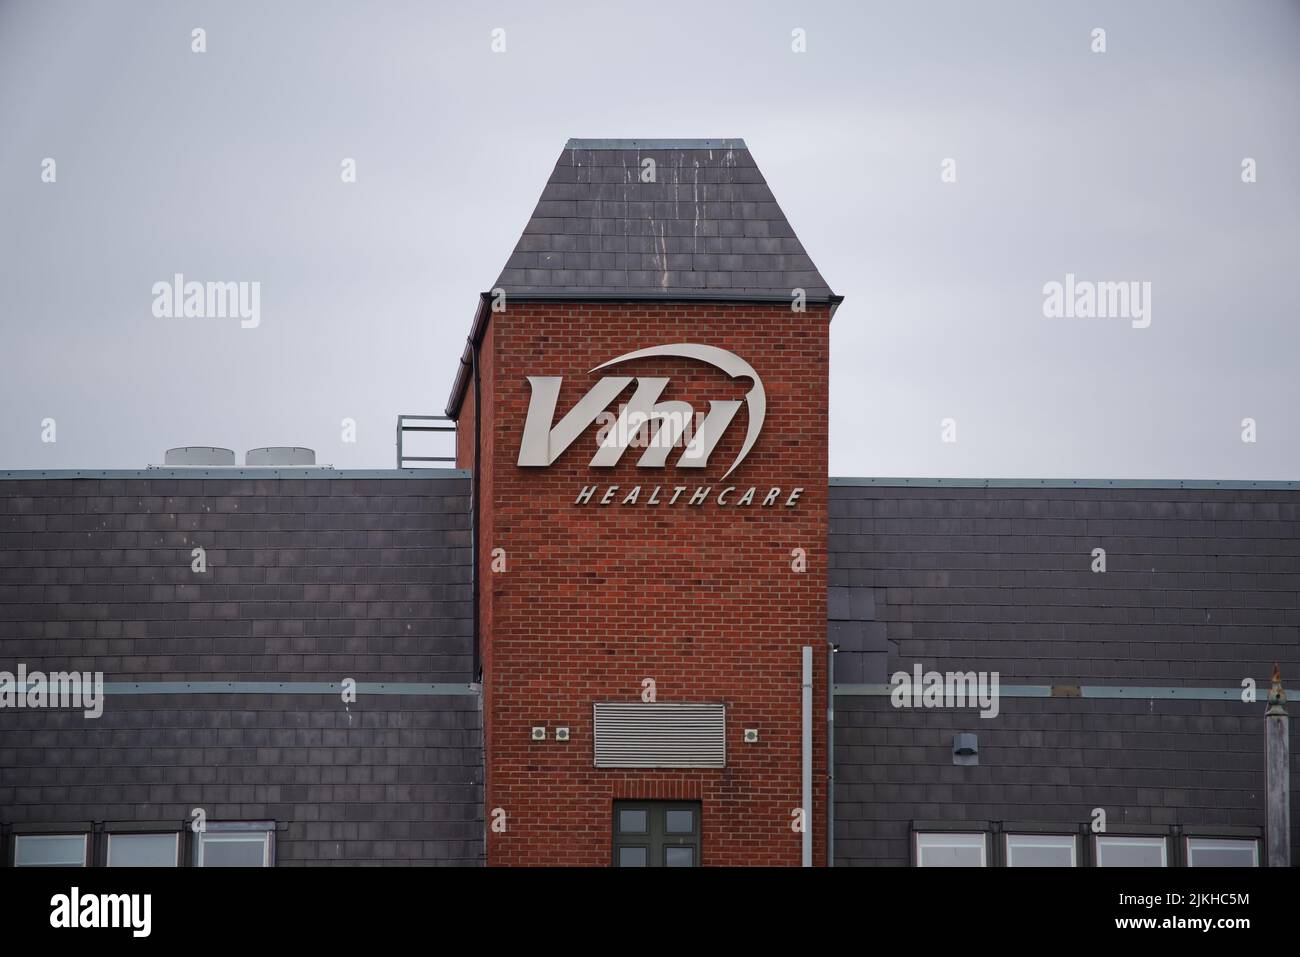 The VHI Healthcare logo mounted on the tower of a red brick building. The VHI is well known health insurance company in Ireland. Stock Photo